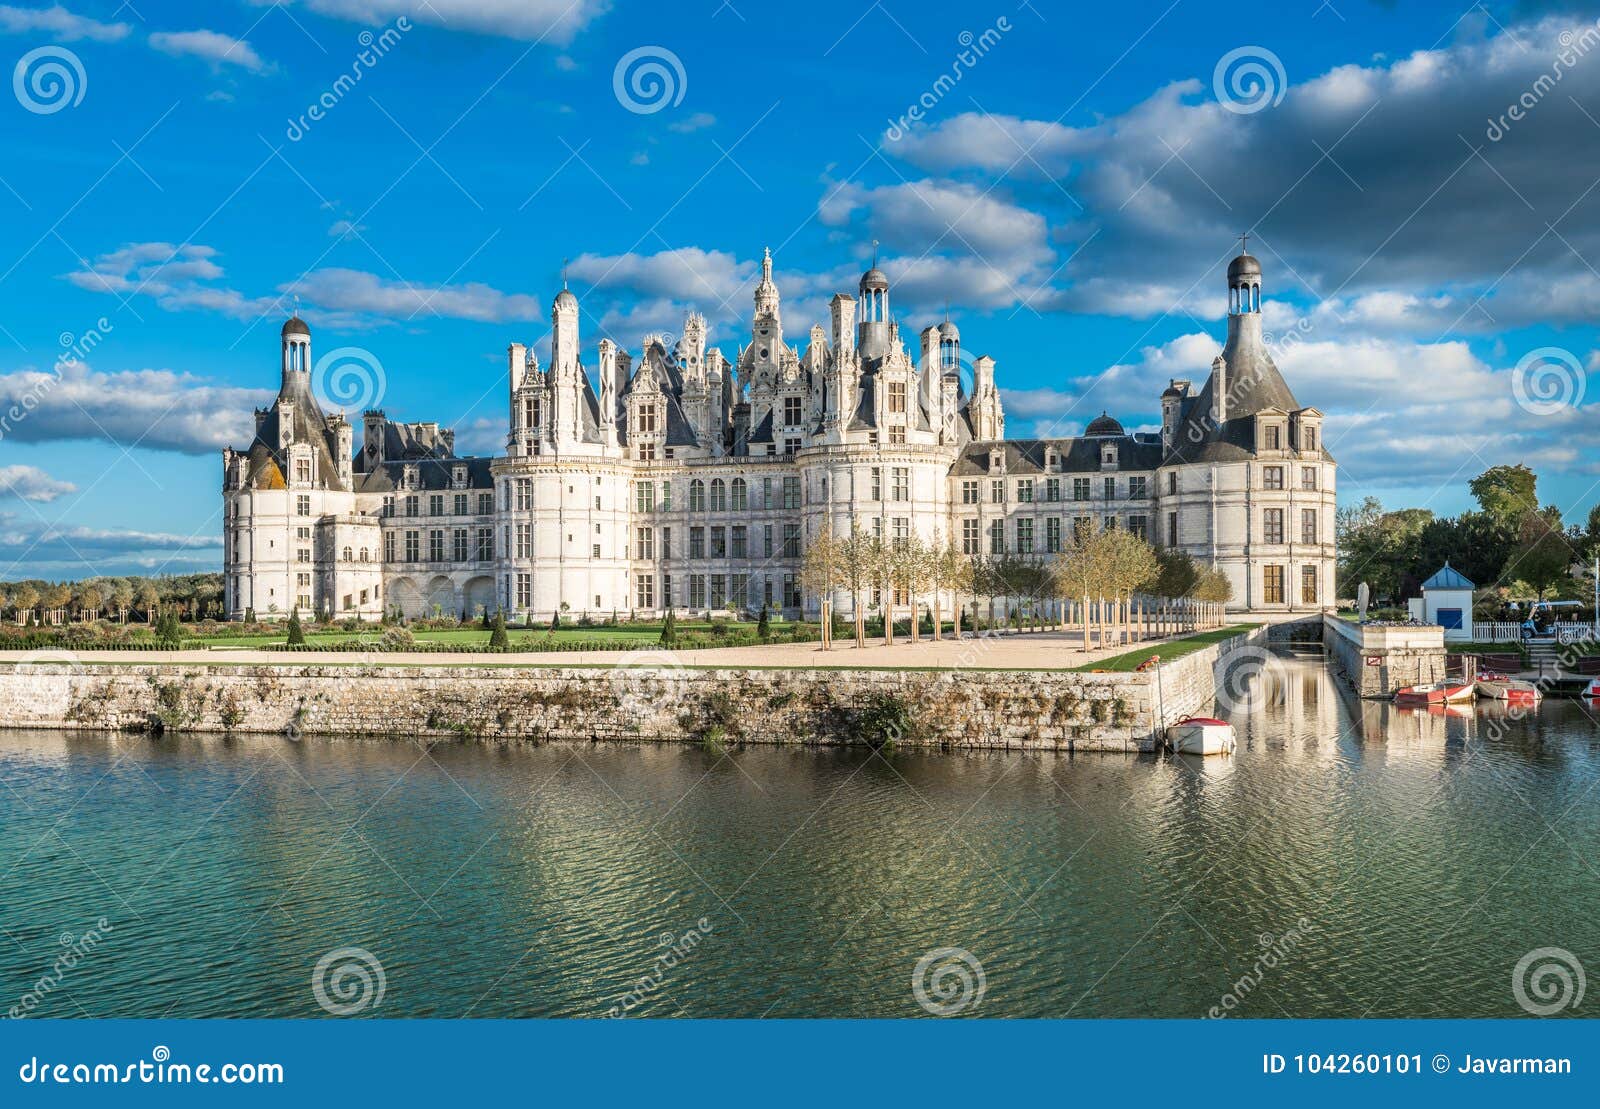 chateau de chambord, the largest castle in the loire valley, france